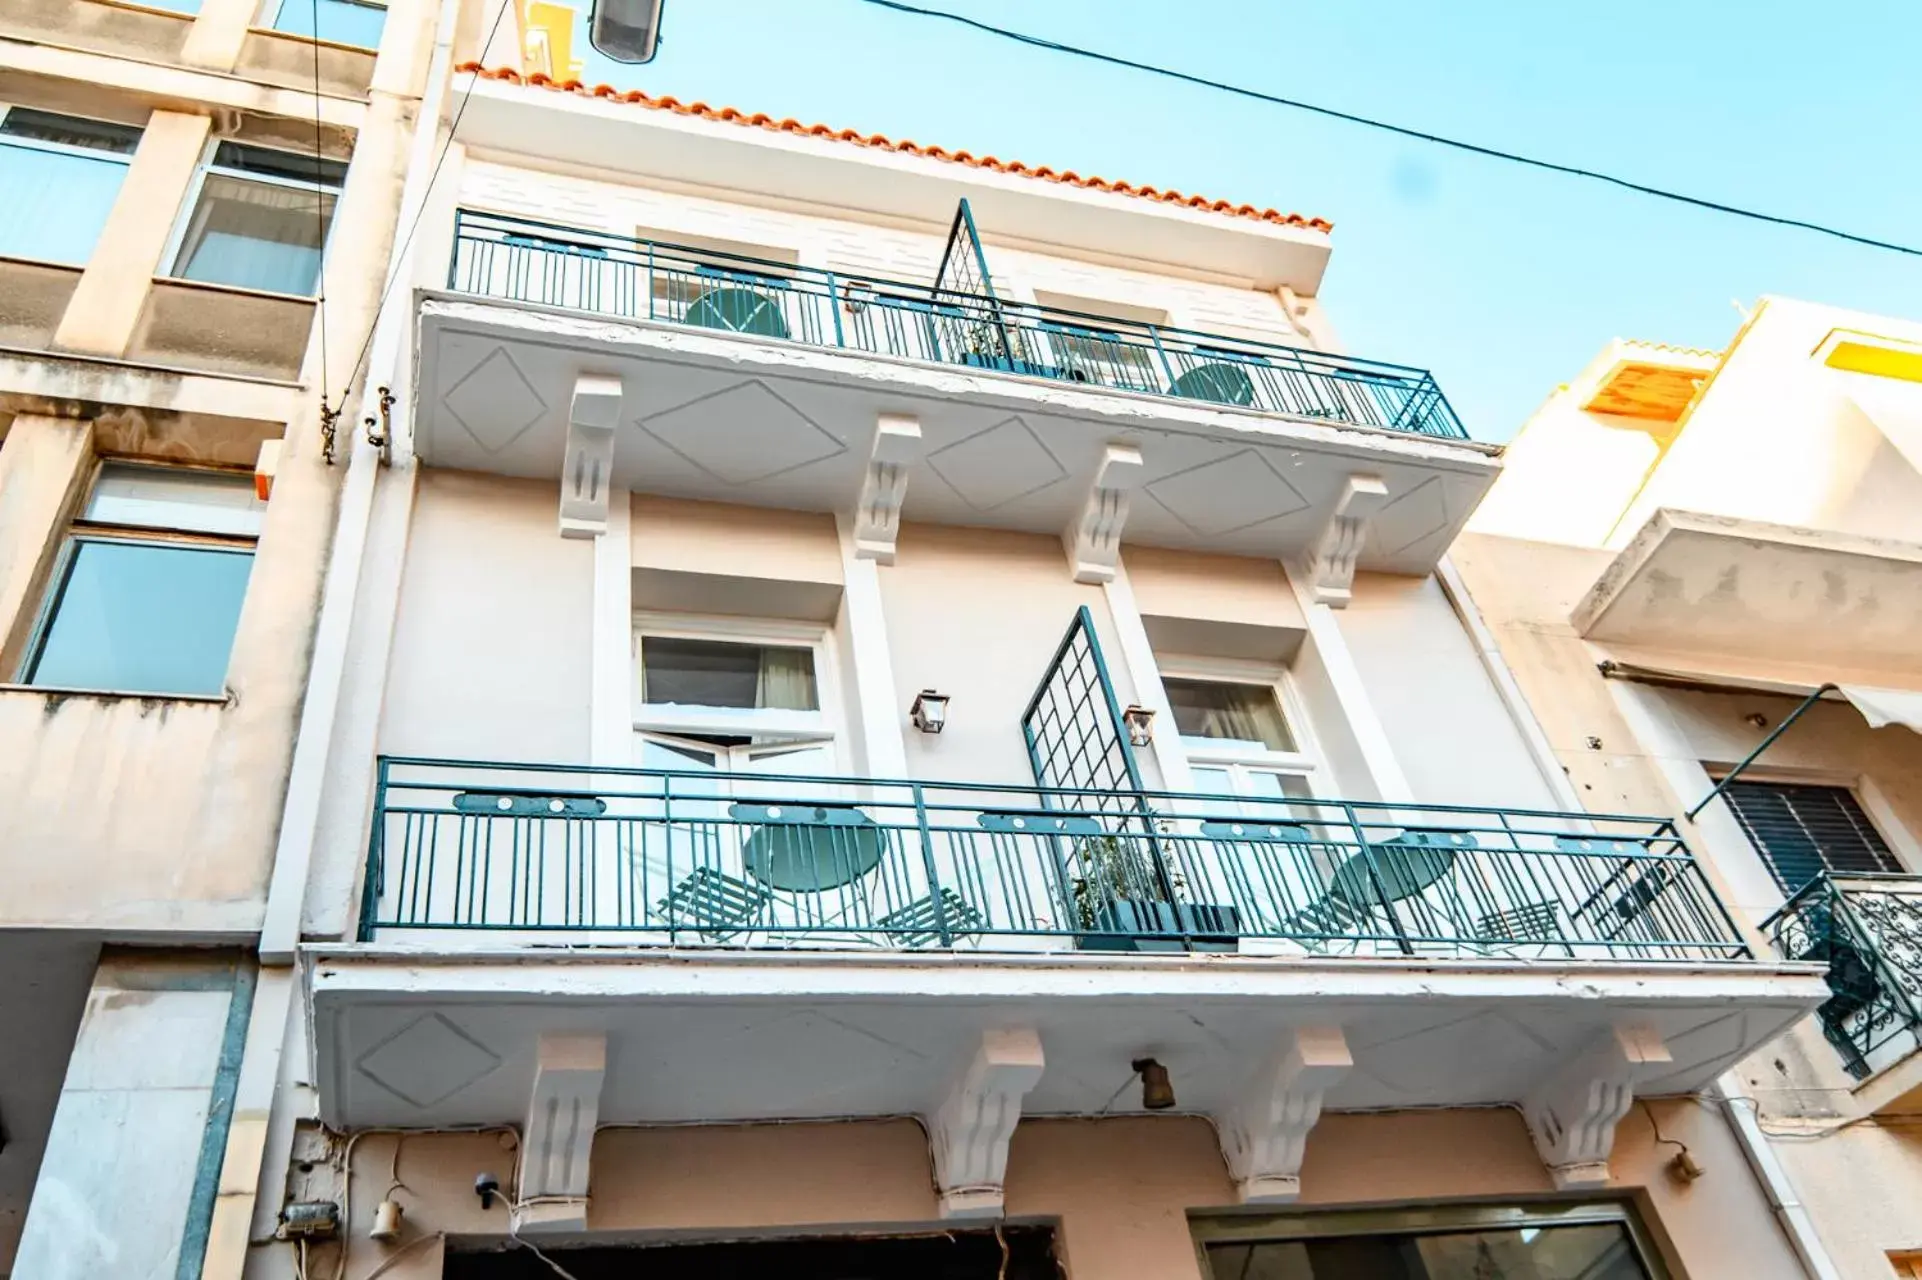 Property Building in A-13 Belle Athenes - Luxury Rooms at Monastiraki Railway Station